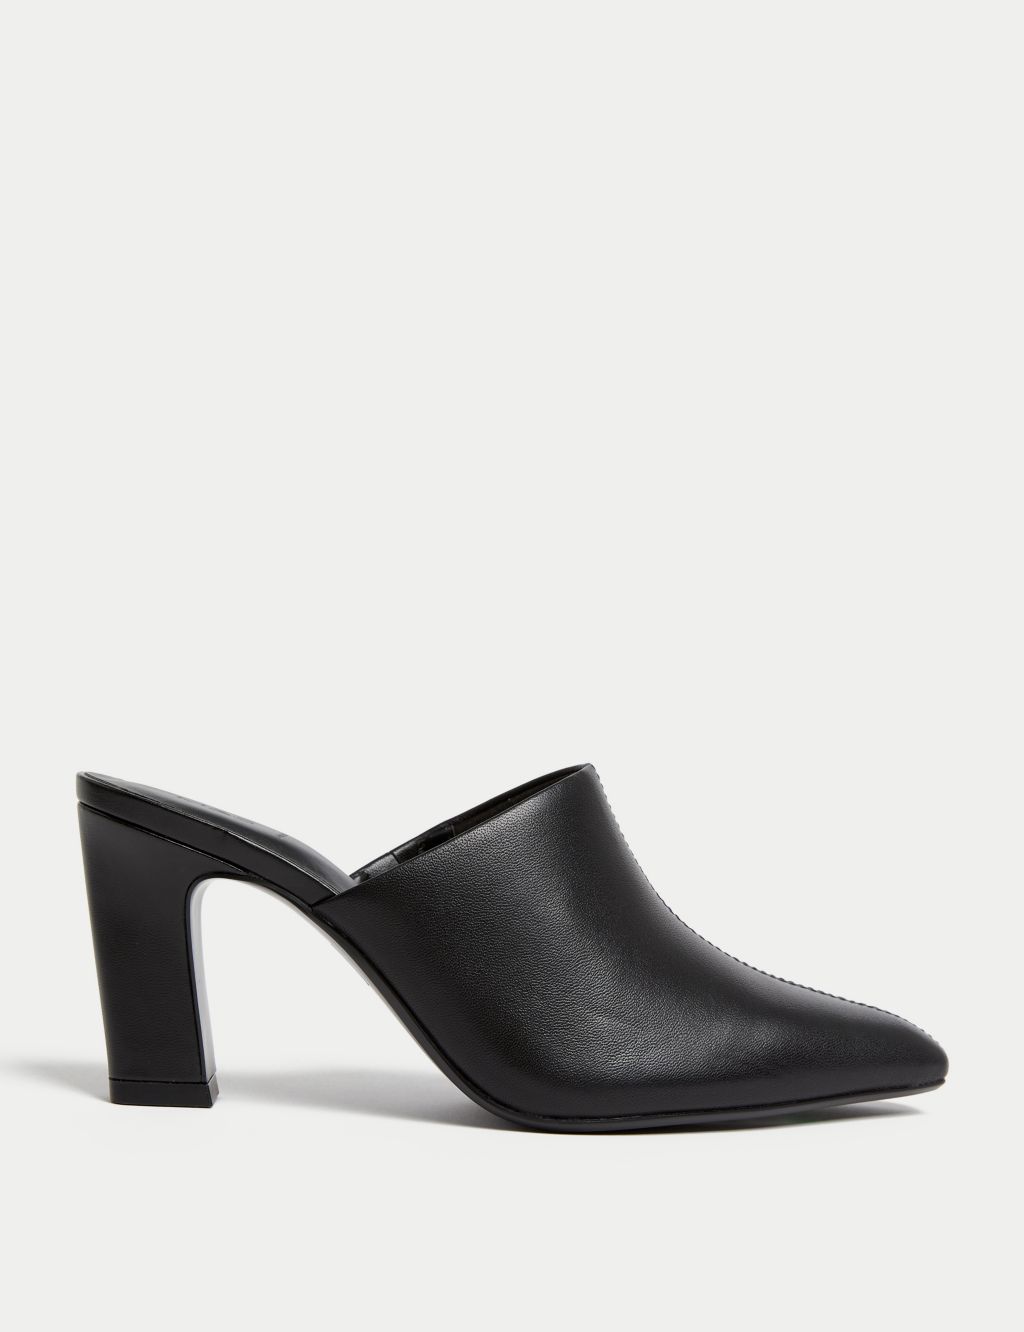 Leather Statement Heel Pointed Mules image 1